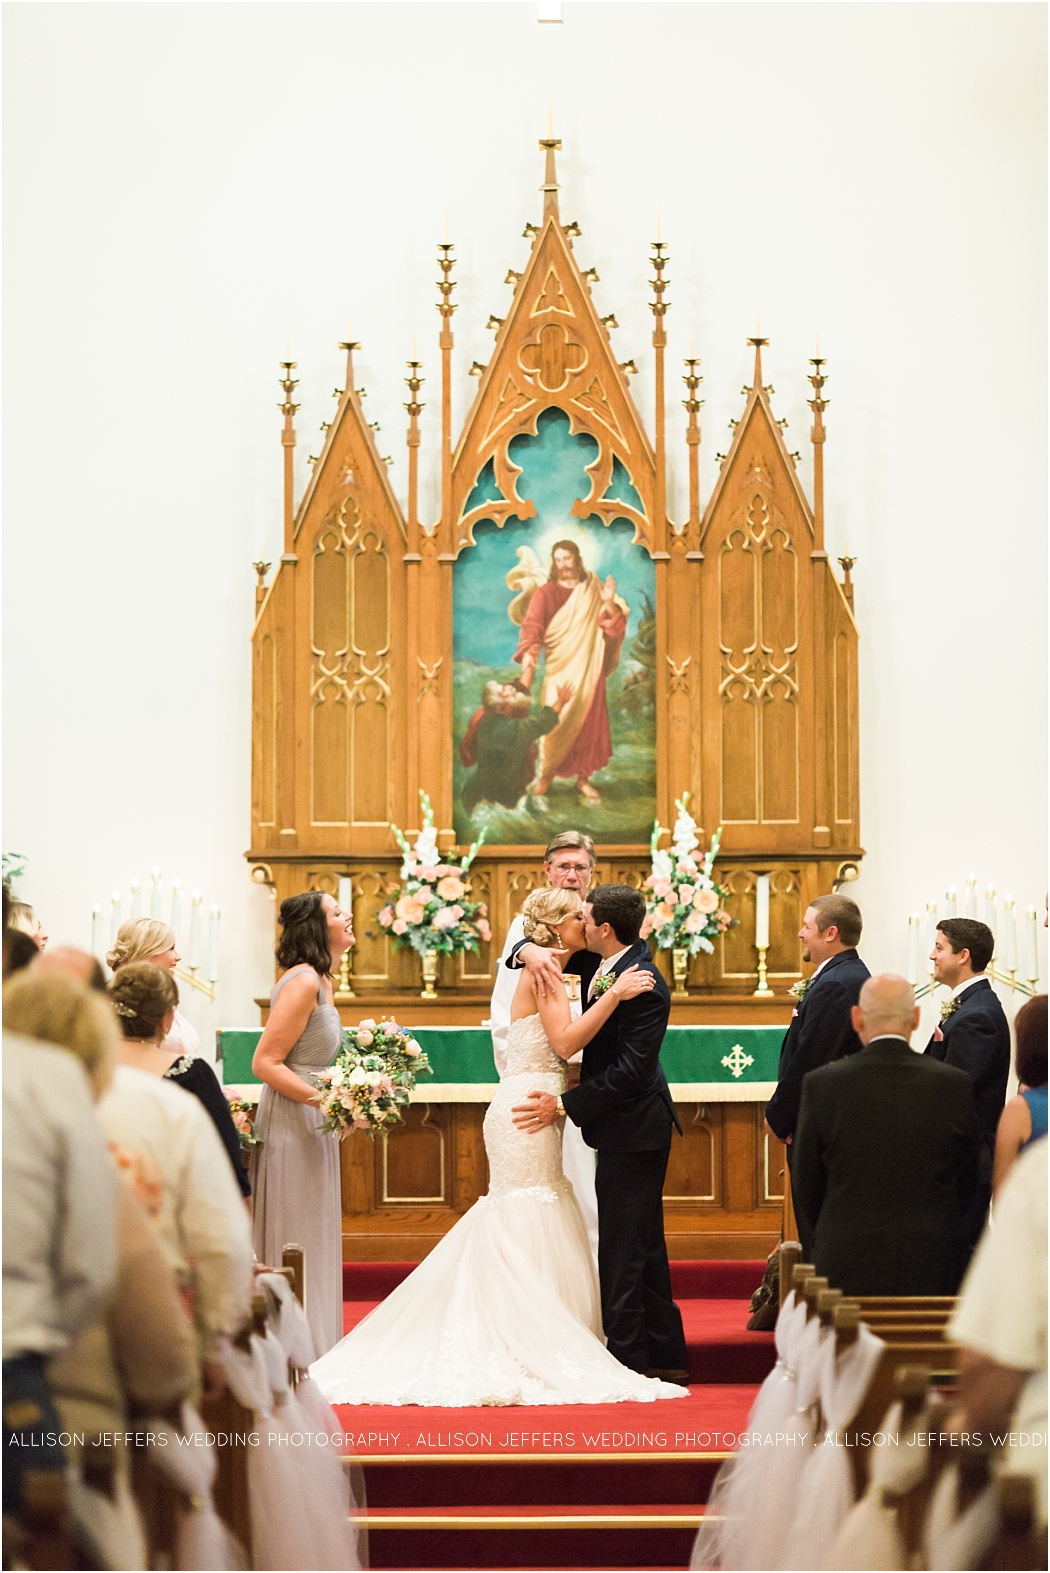 pastel-wedding-at-holy-ghost-lutheran-church-in-fredericksburg-texas-fredericksburg-wedding-photographer_0035